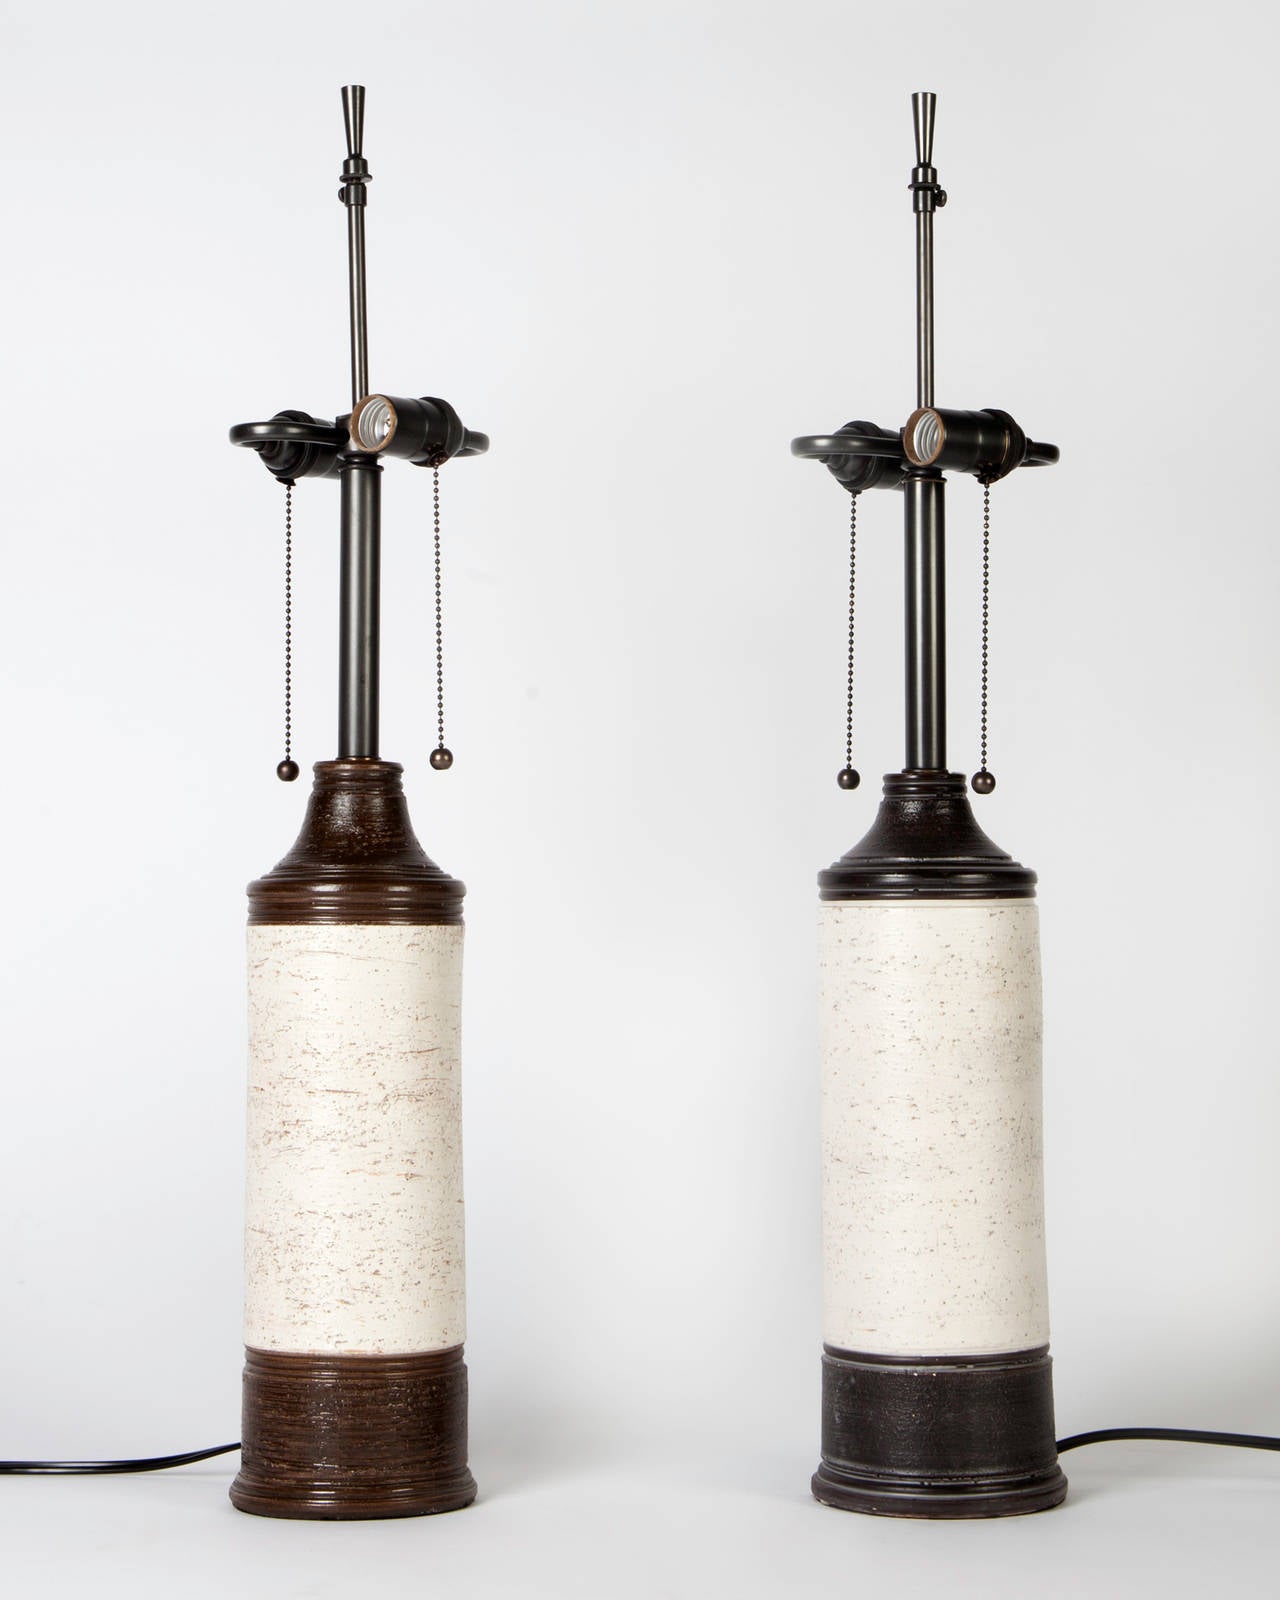 ATL1890.

A pair of Mid-Century Modern faux bois ceramic lamps glazed and textured to look like rustic birch trees. Having darkened brass fittings. Signed by the Swedish maker Bergboms; marked 